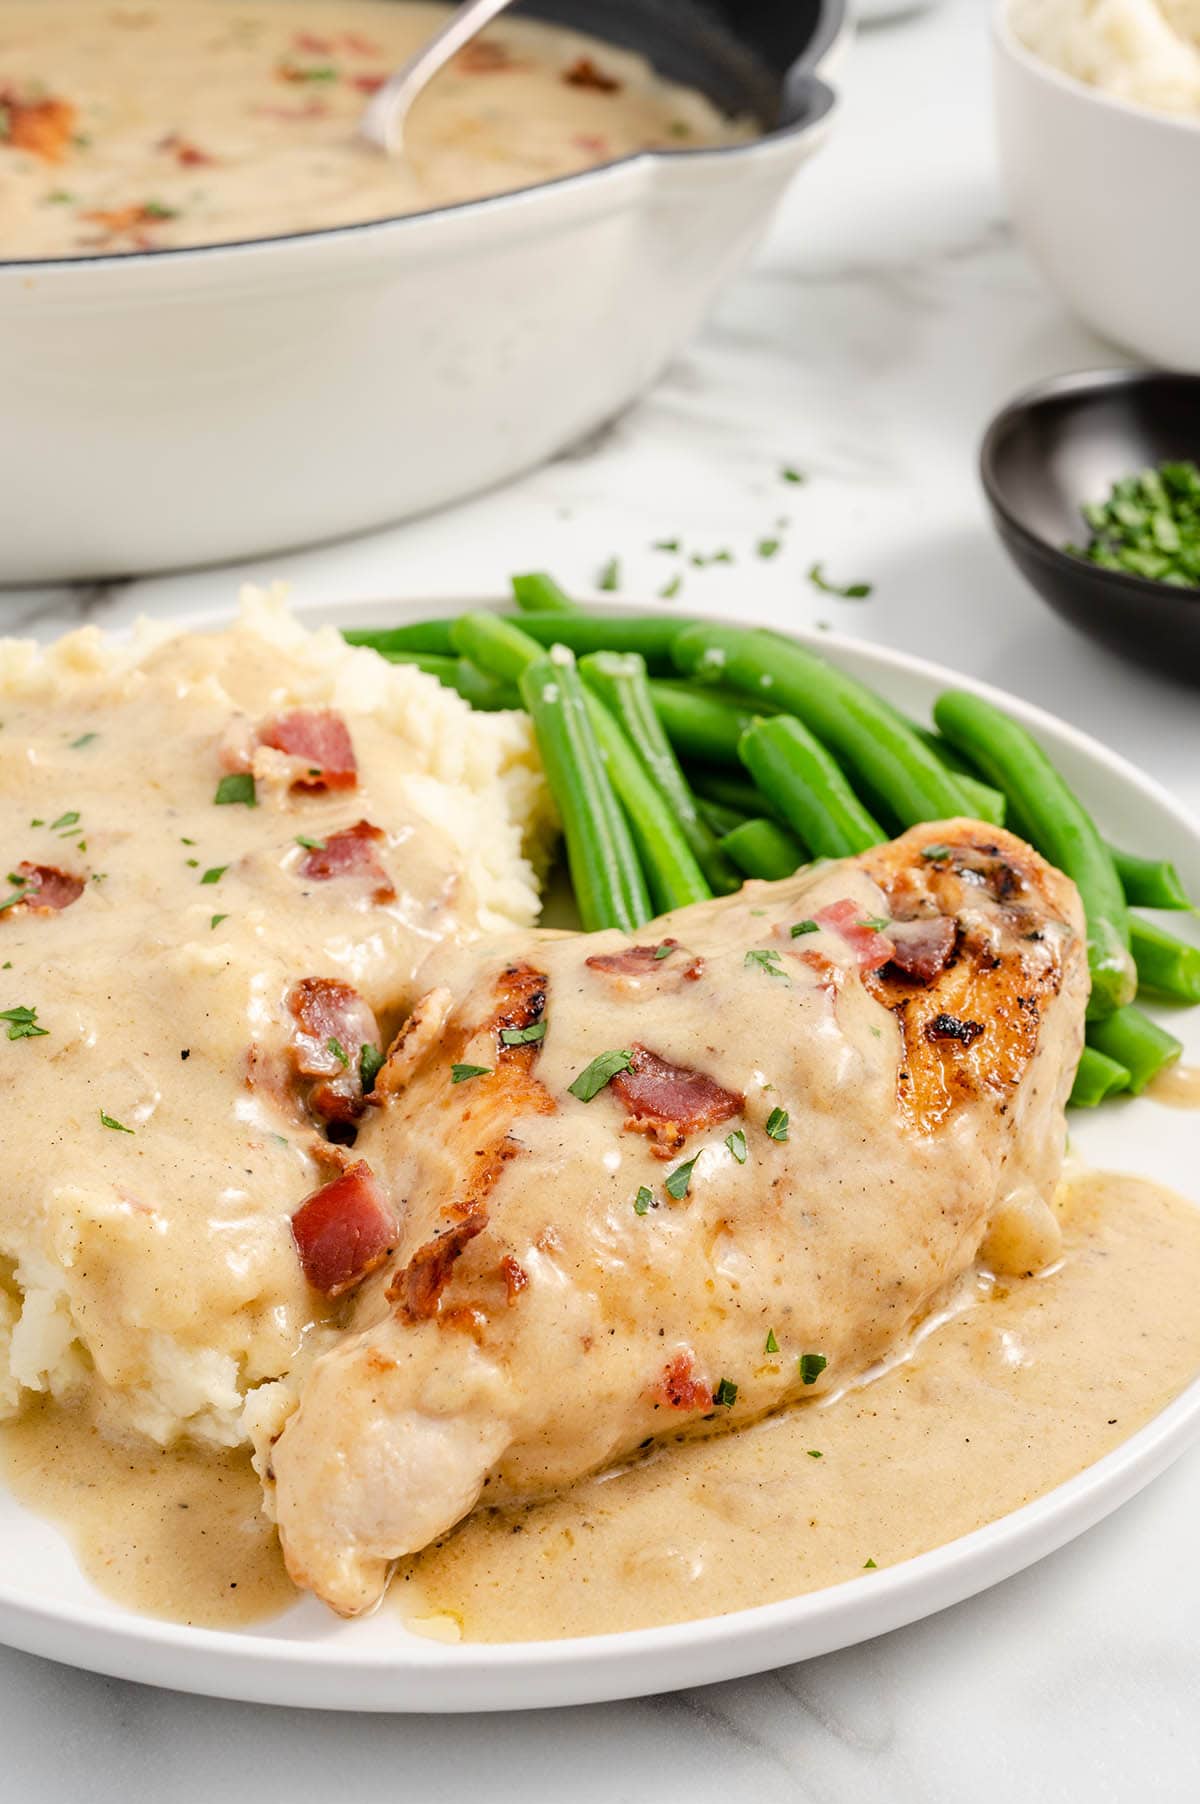 Smothered Chicken served with string beans and mashed potatoes.